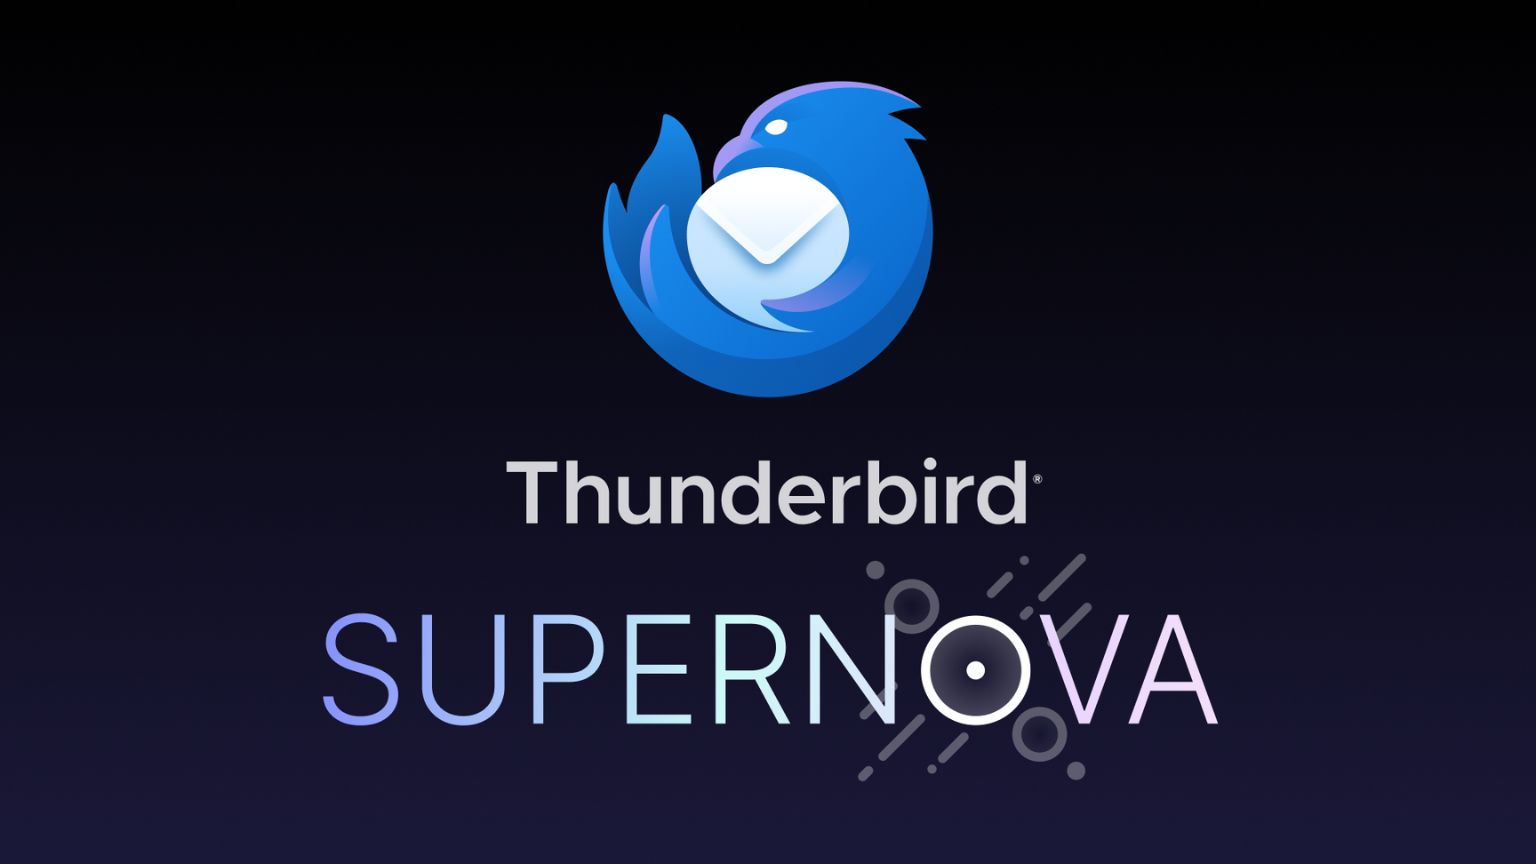 Thunderbird Introduces New Version With Updated Design